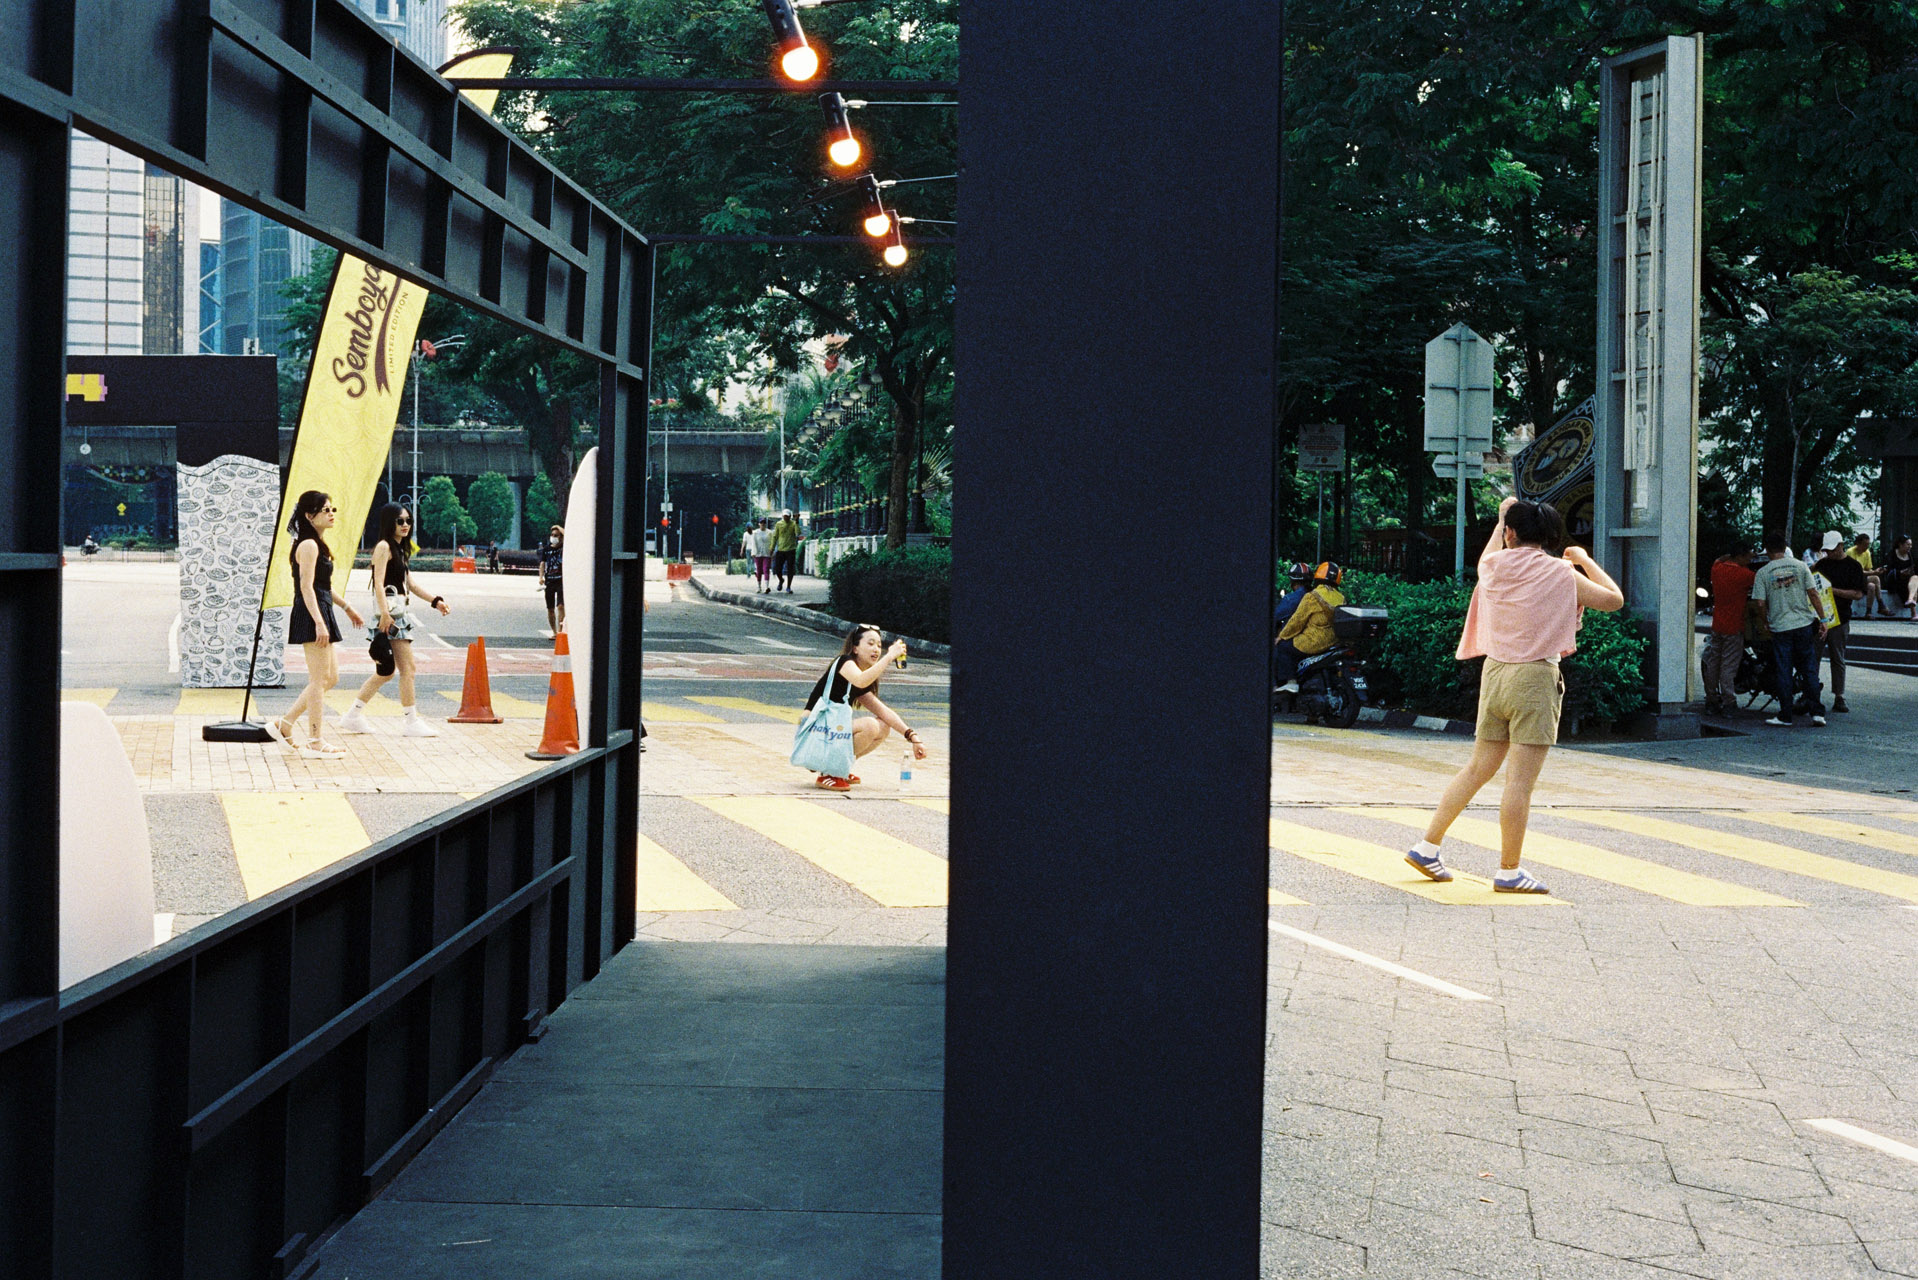 Contax G1 Street Photography